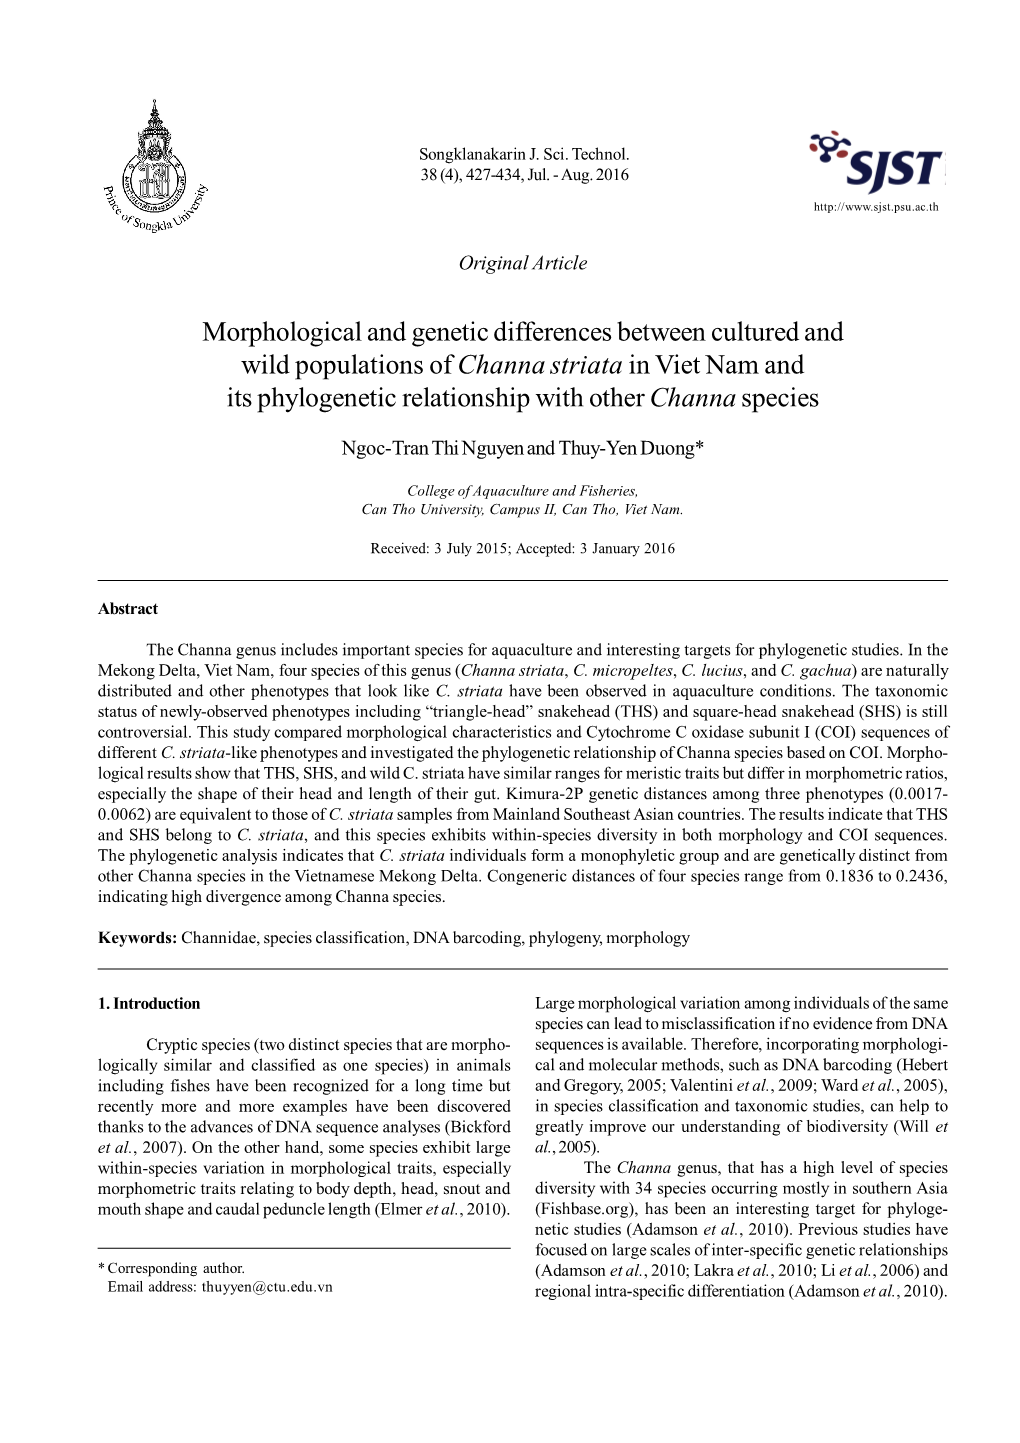 Channa Striata in Viet Nam and Its Phylogenetic Relationship with Other Channa Species